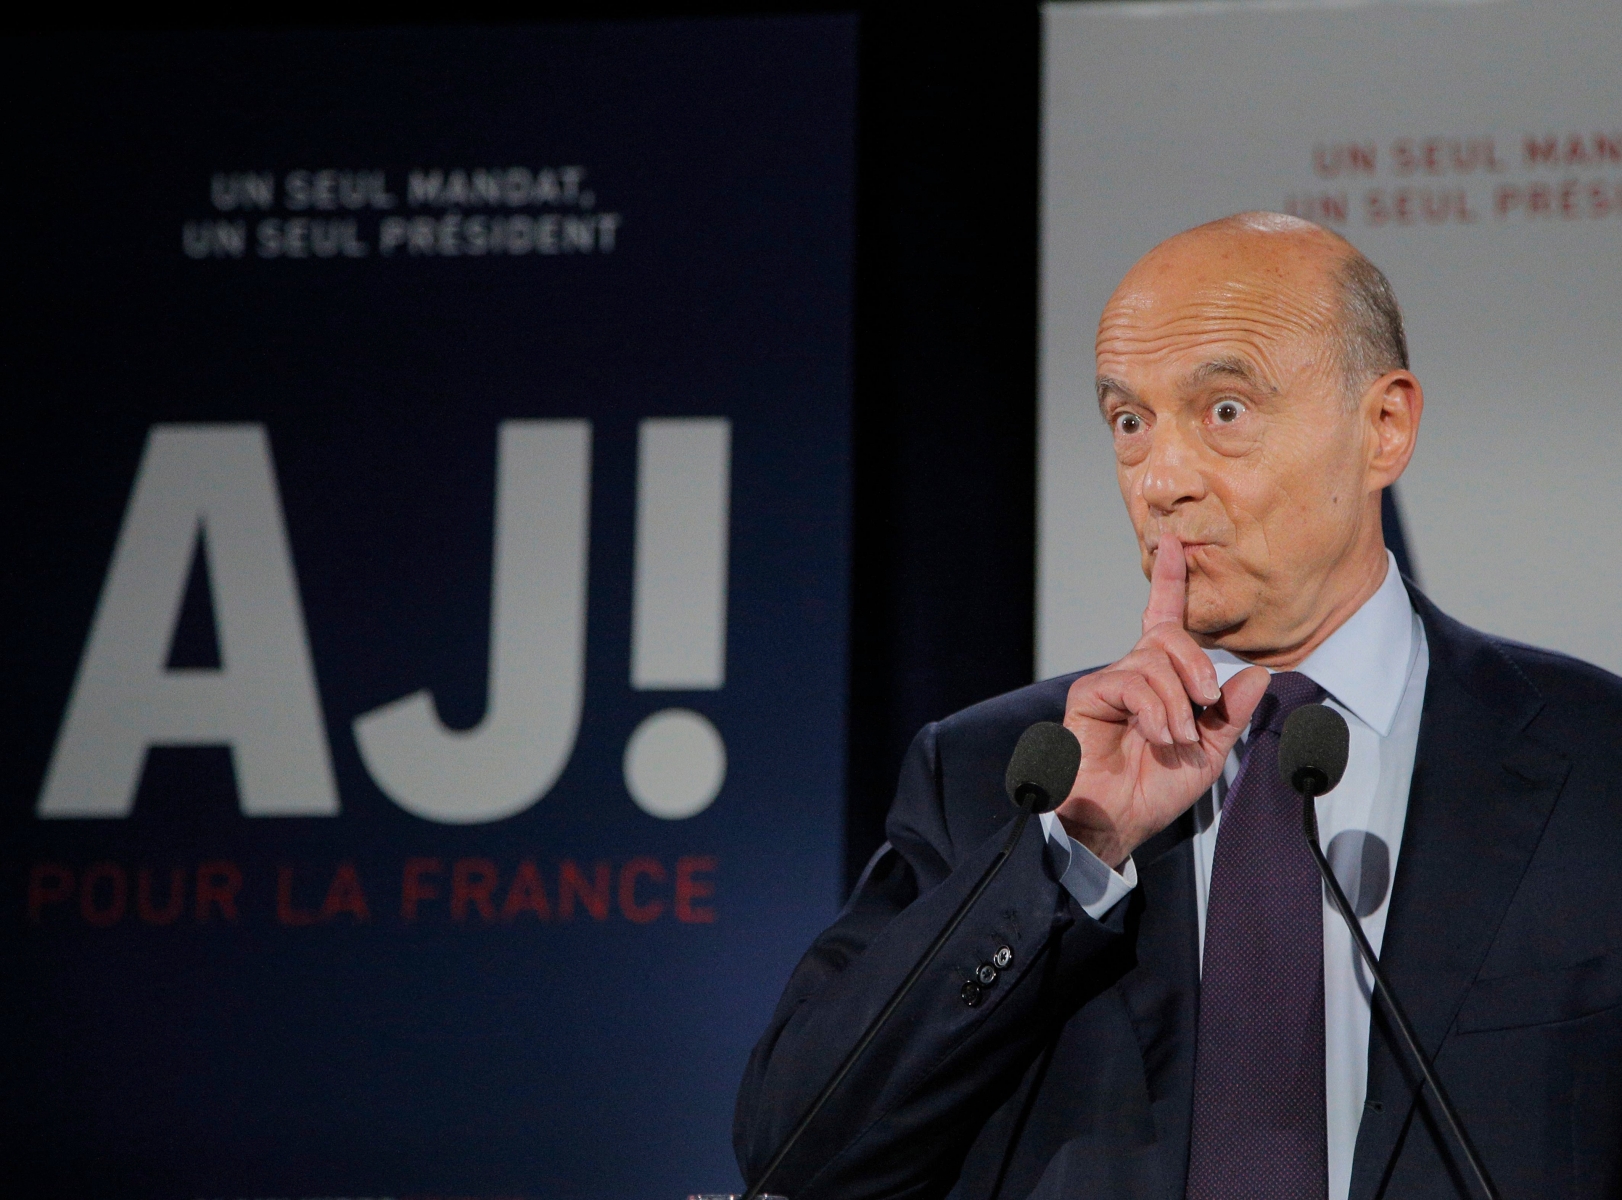 French presidential contender Alain Juppe gestures as he speaks after the first round of the nationwide conservatives primary in Paris, Sunday, Nov. 20, 2016. Ex-prime ministers Francois Fillon and Alain Juppe both outpolled France's former President Nicolas Sarkozy in early returns, and stand to advance to the Nov. 27 runoff. (AP Photo/Michel Euler) France Election